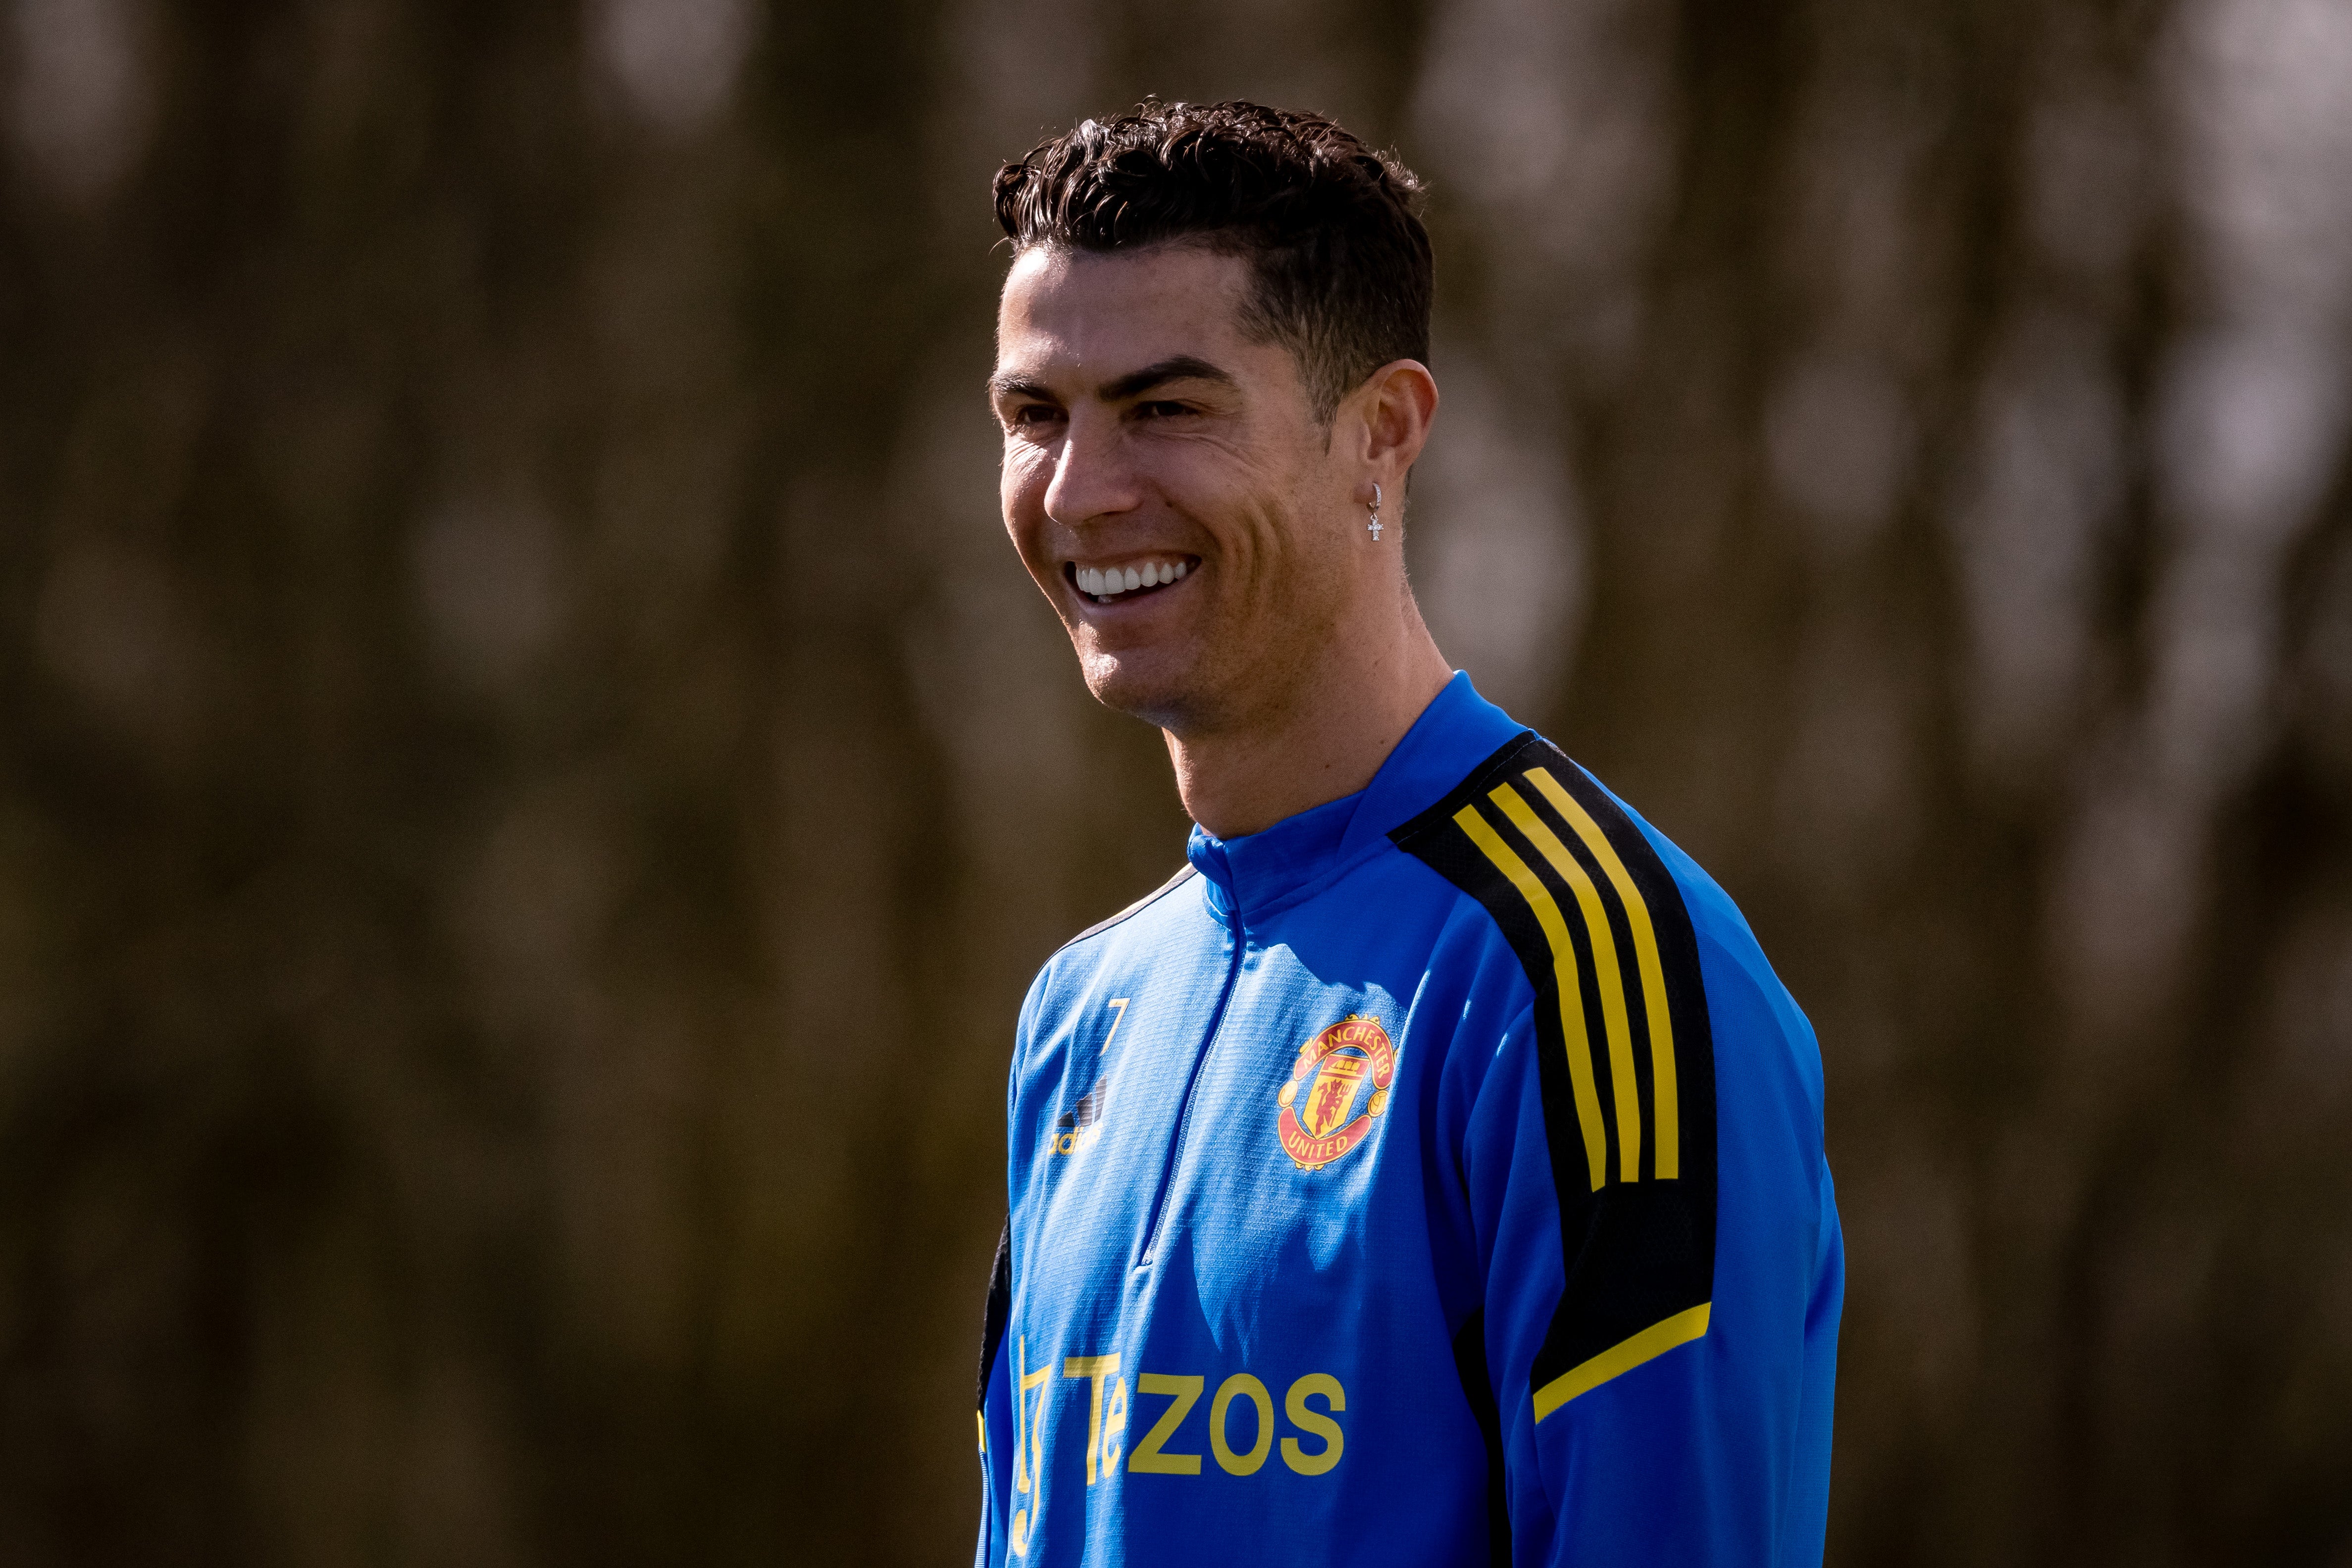 Cristiano Ronaldo of Manchester United in action during a first team training session